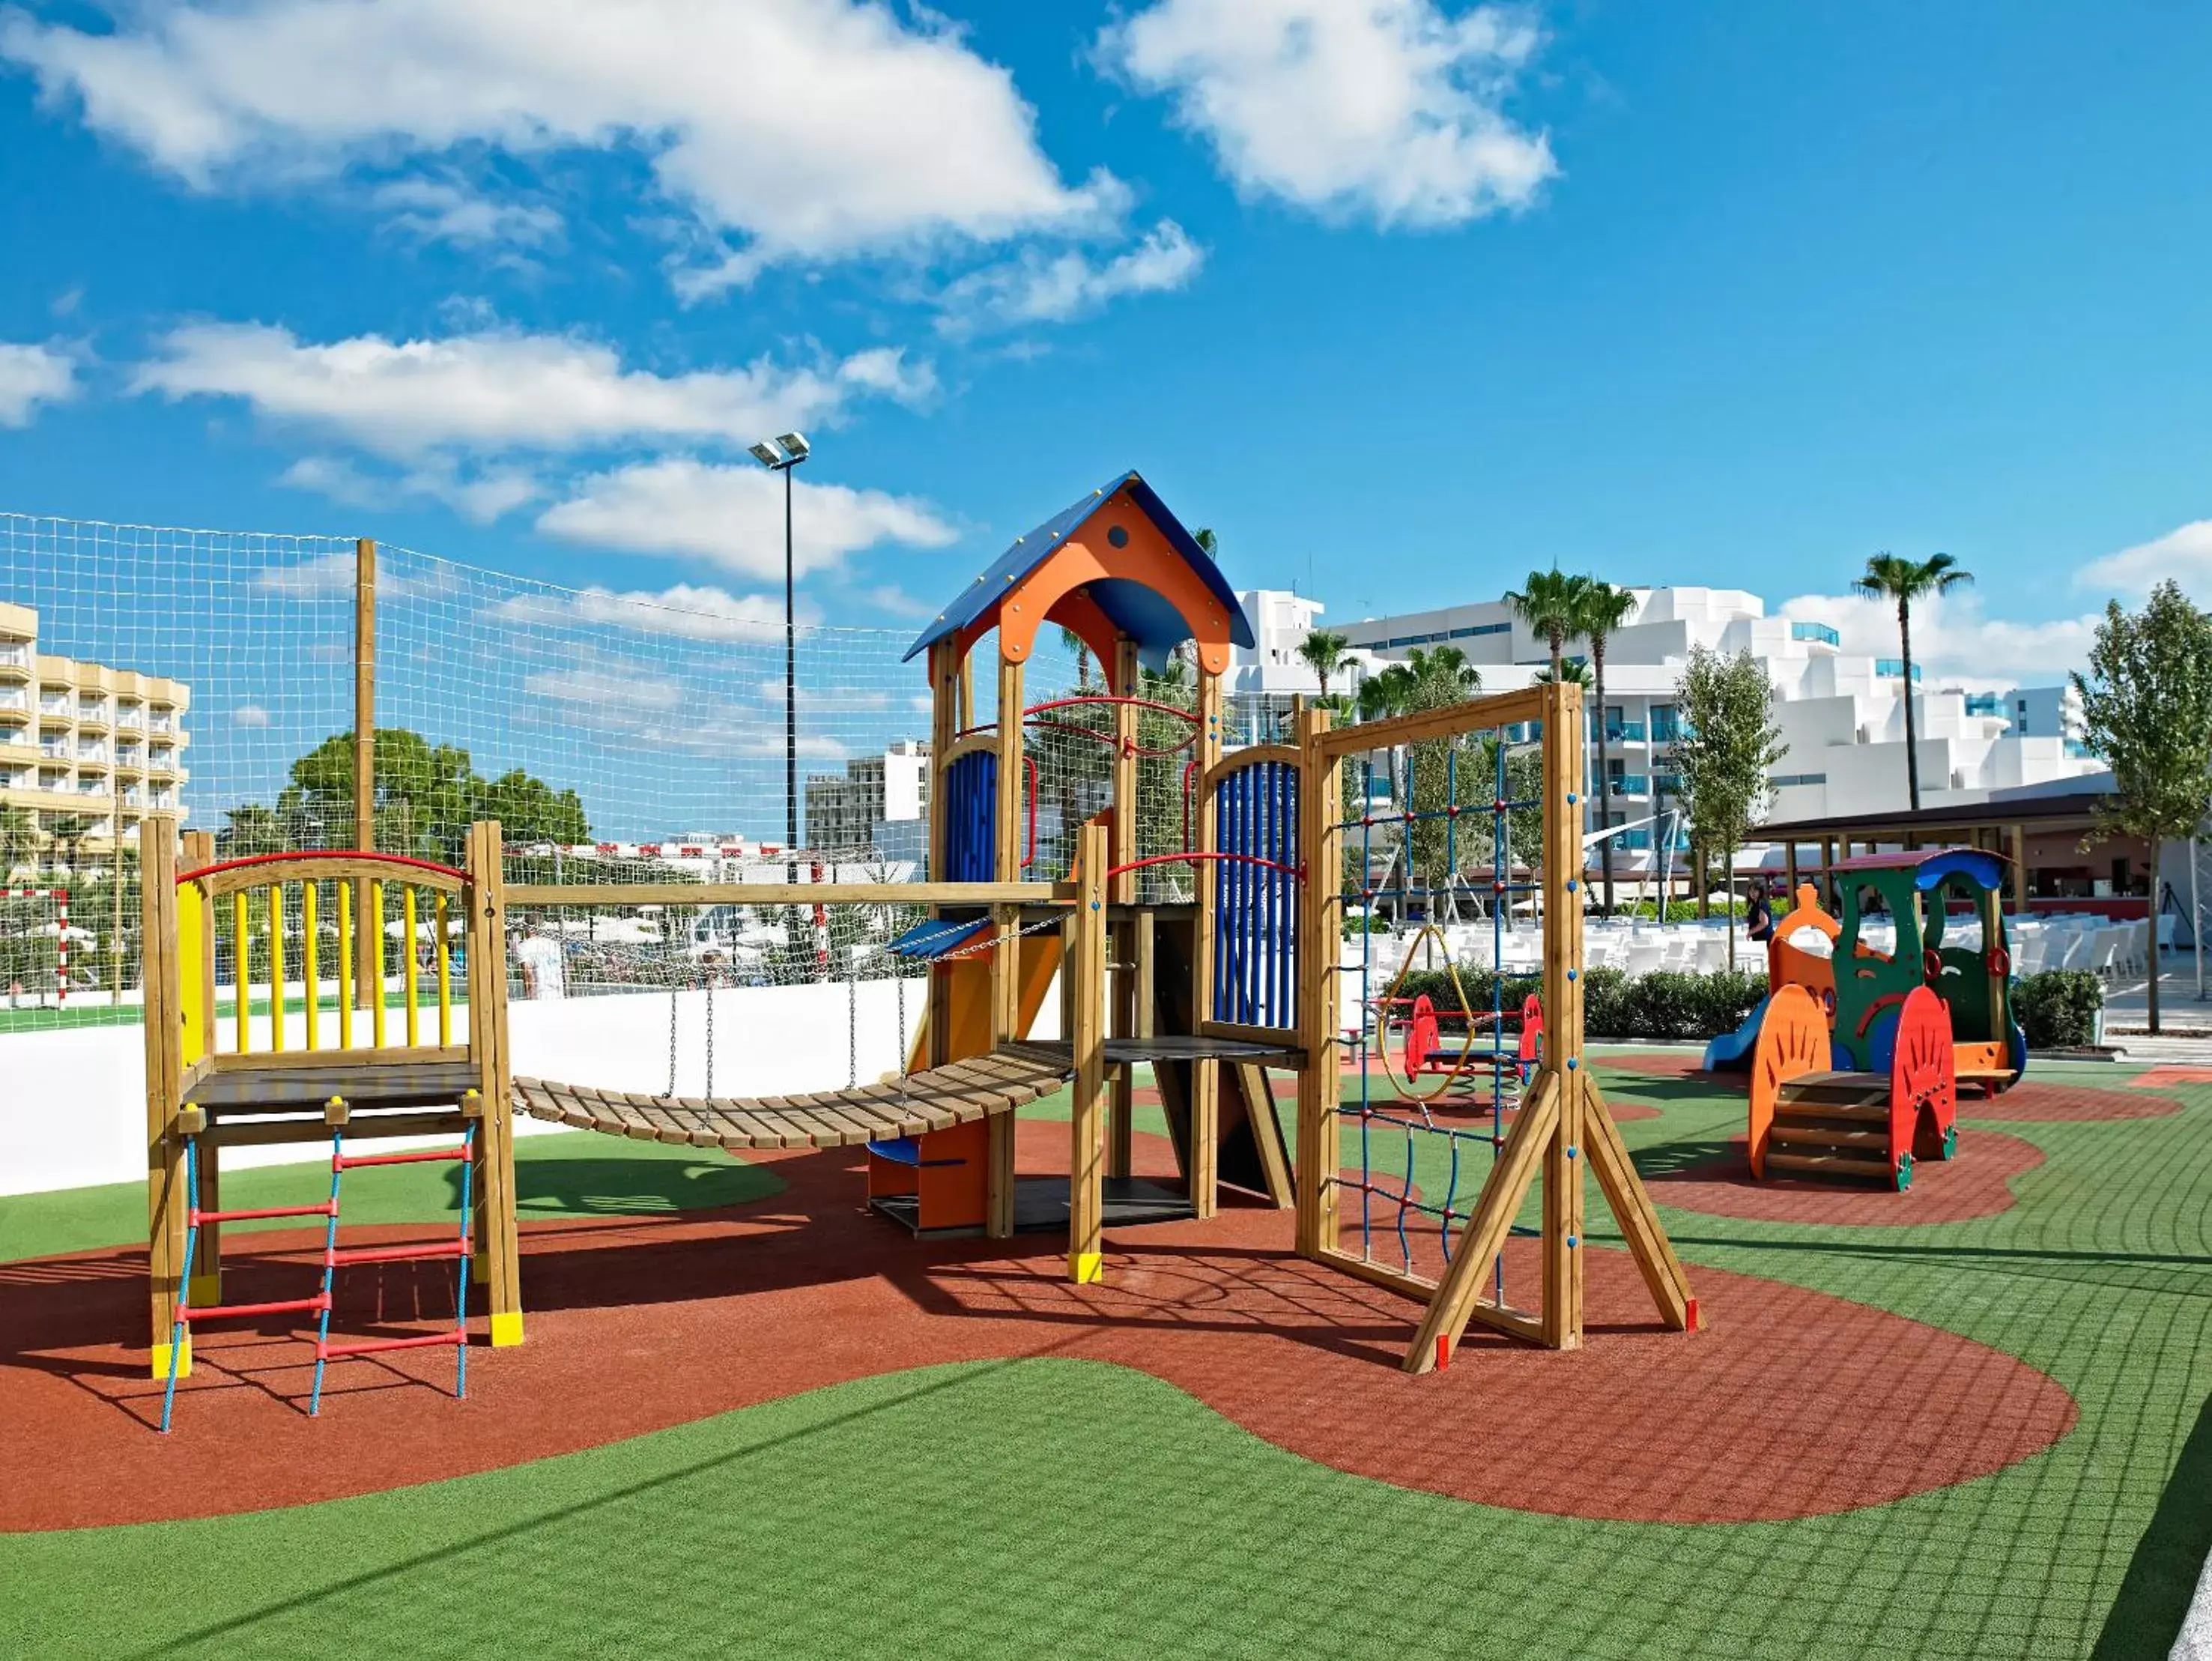 Children play ground, Children's Play Area in Hipotels Cala Millor Park